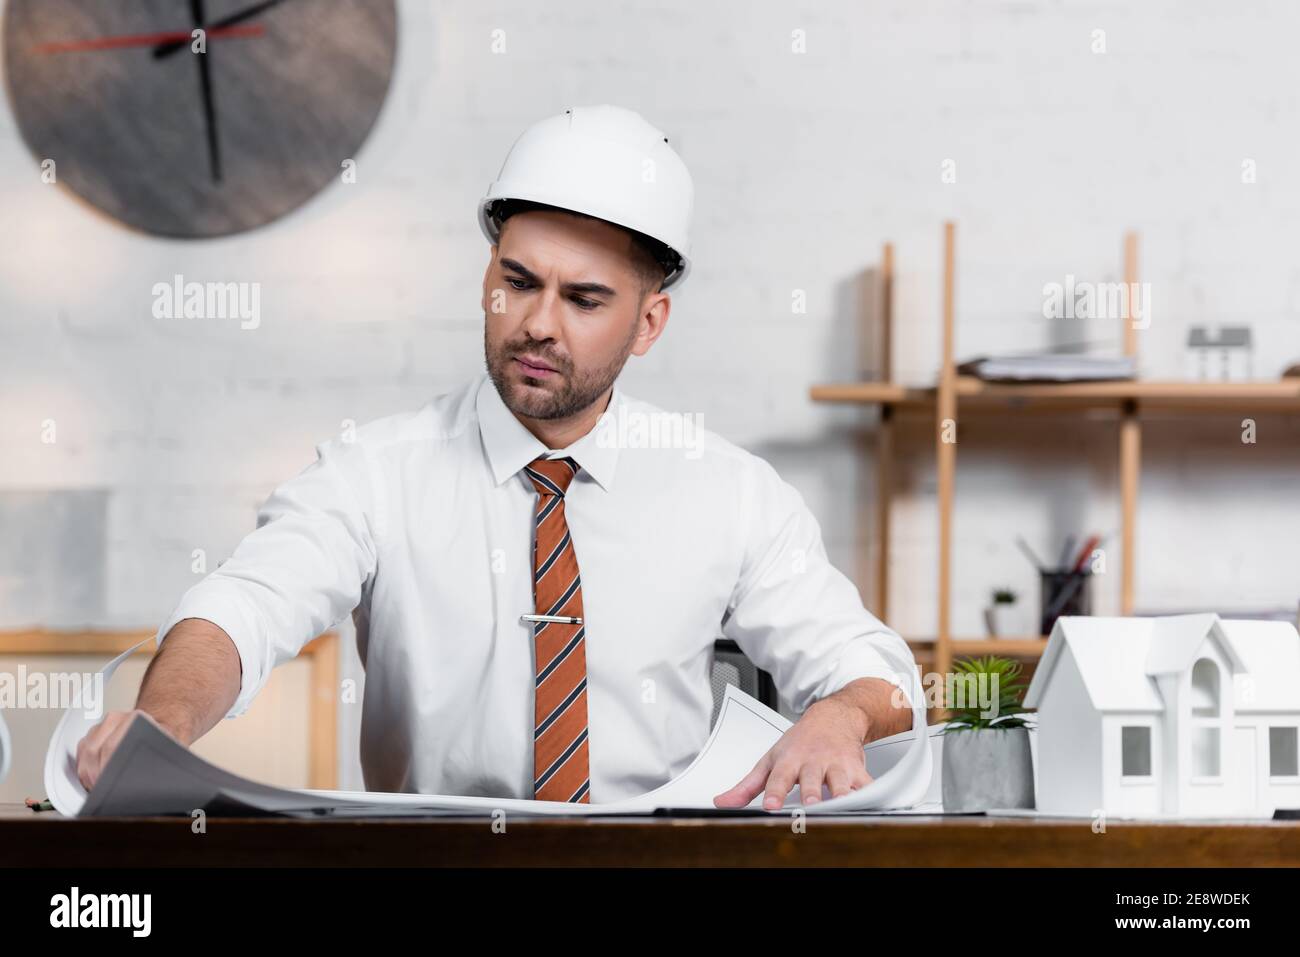 concentrated architect in helmet working on project near house model Stock Photo